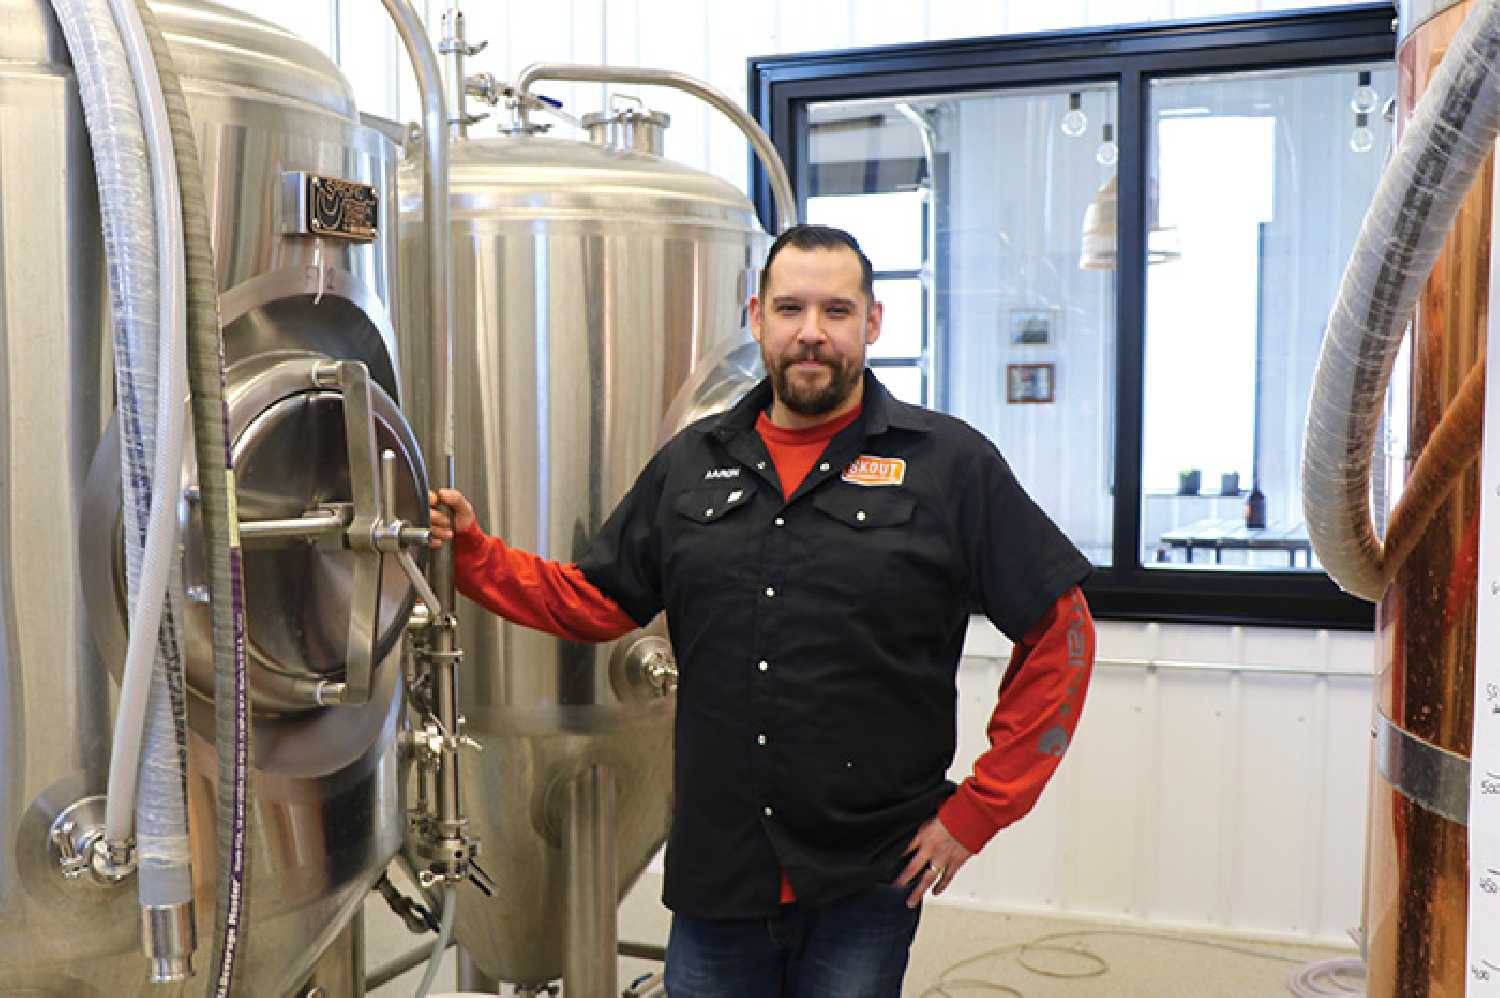 Aaron Grandguillot is the proud owner of Skout Brewing, which will be opening in Moosomin this Friday. Here he stands in the brewing room of the new craft brewery.